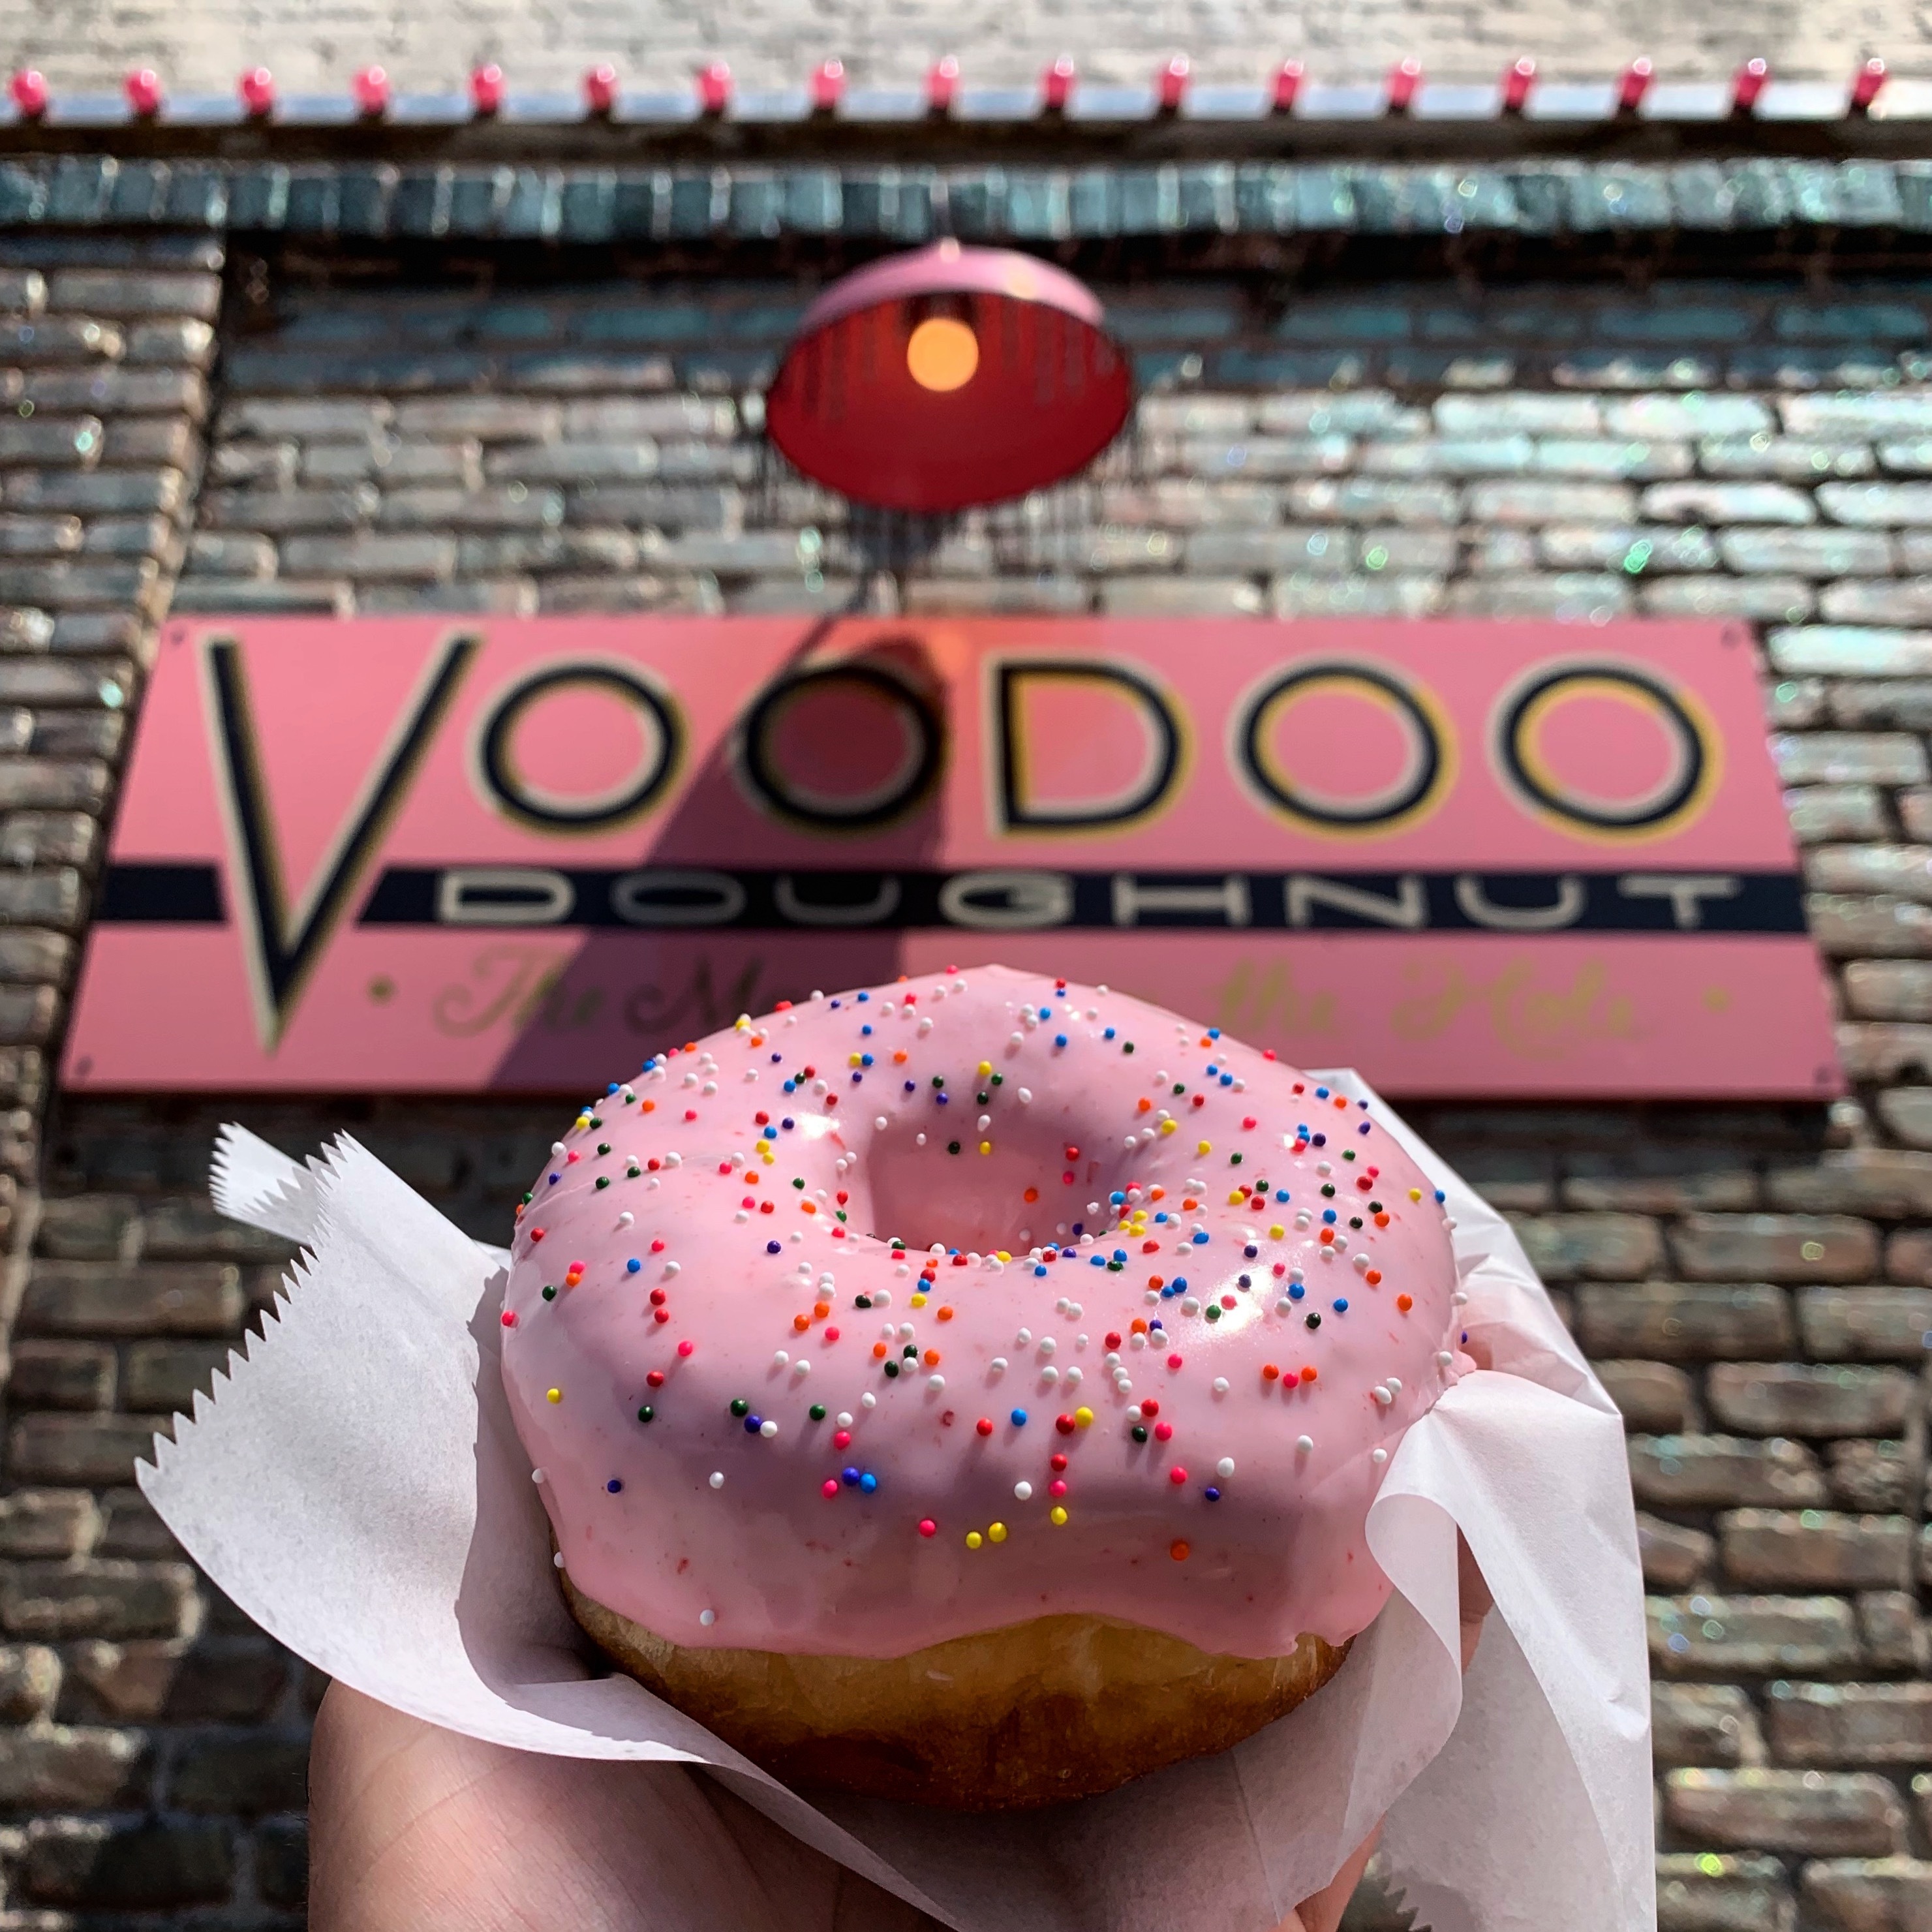 A picture of a hand holding up a Pepto-Bismol pink-glazed doughnut in front of the Voodoo Doughnut sign